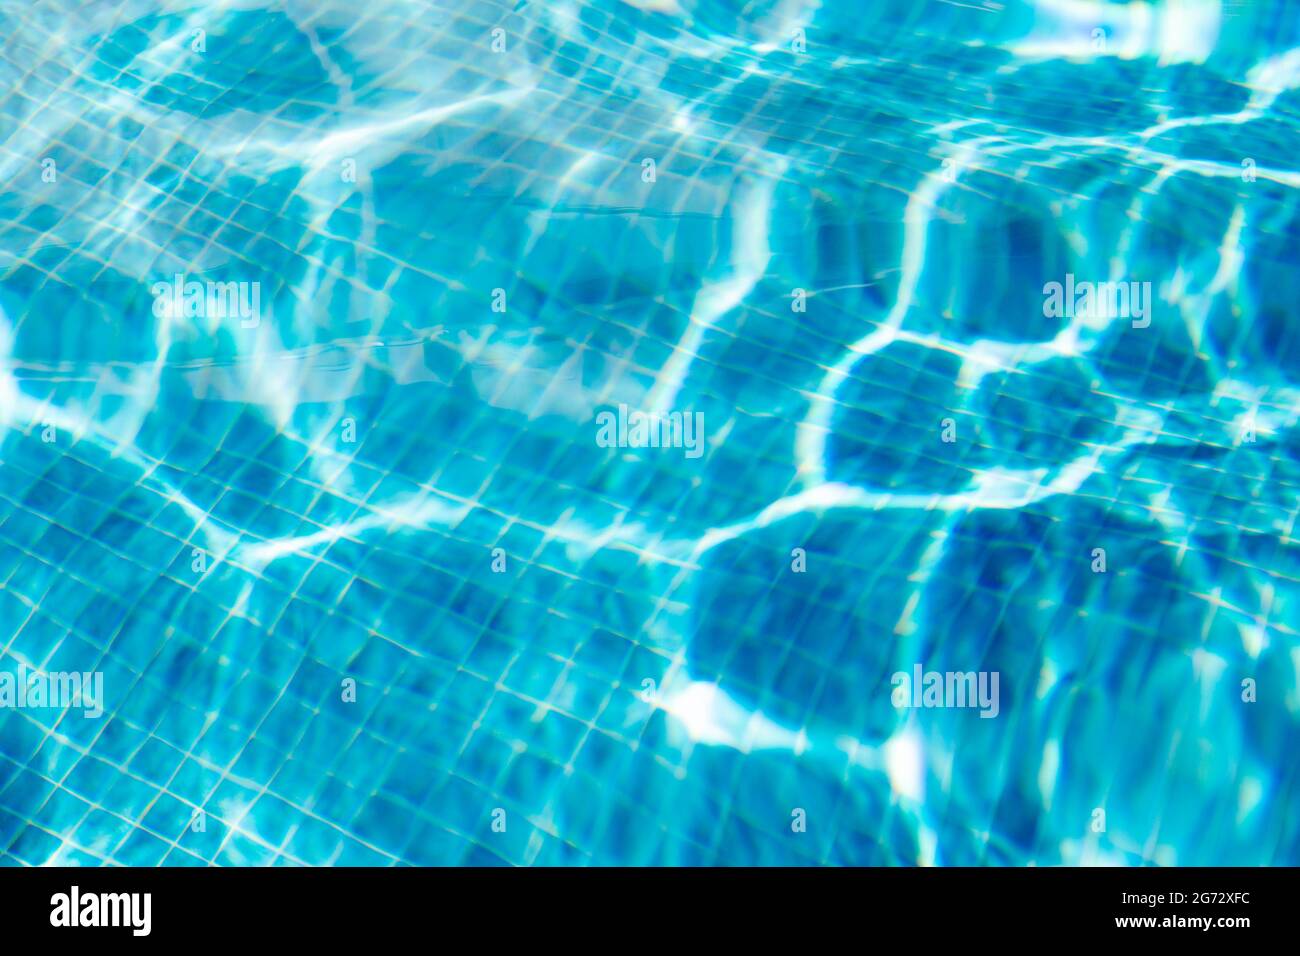 Floor of a swimming pool reflecting sunrays on blue square tiles. Stock Photo